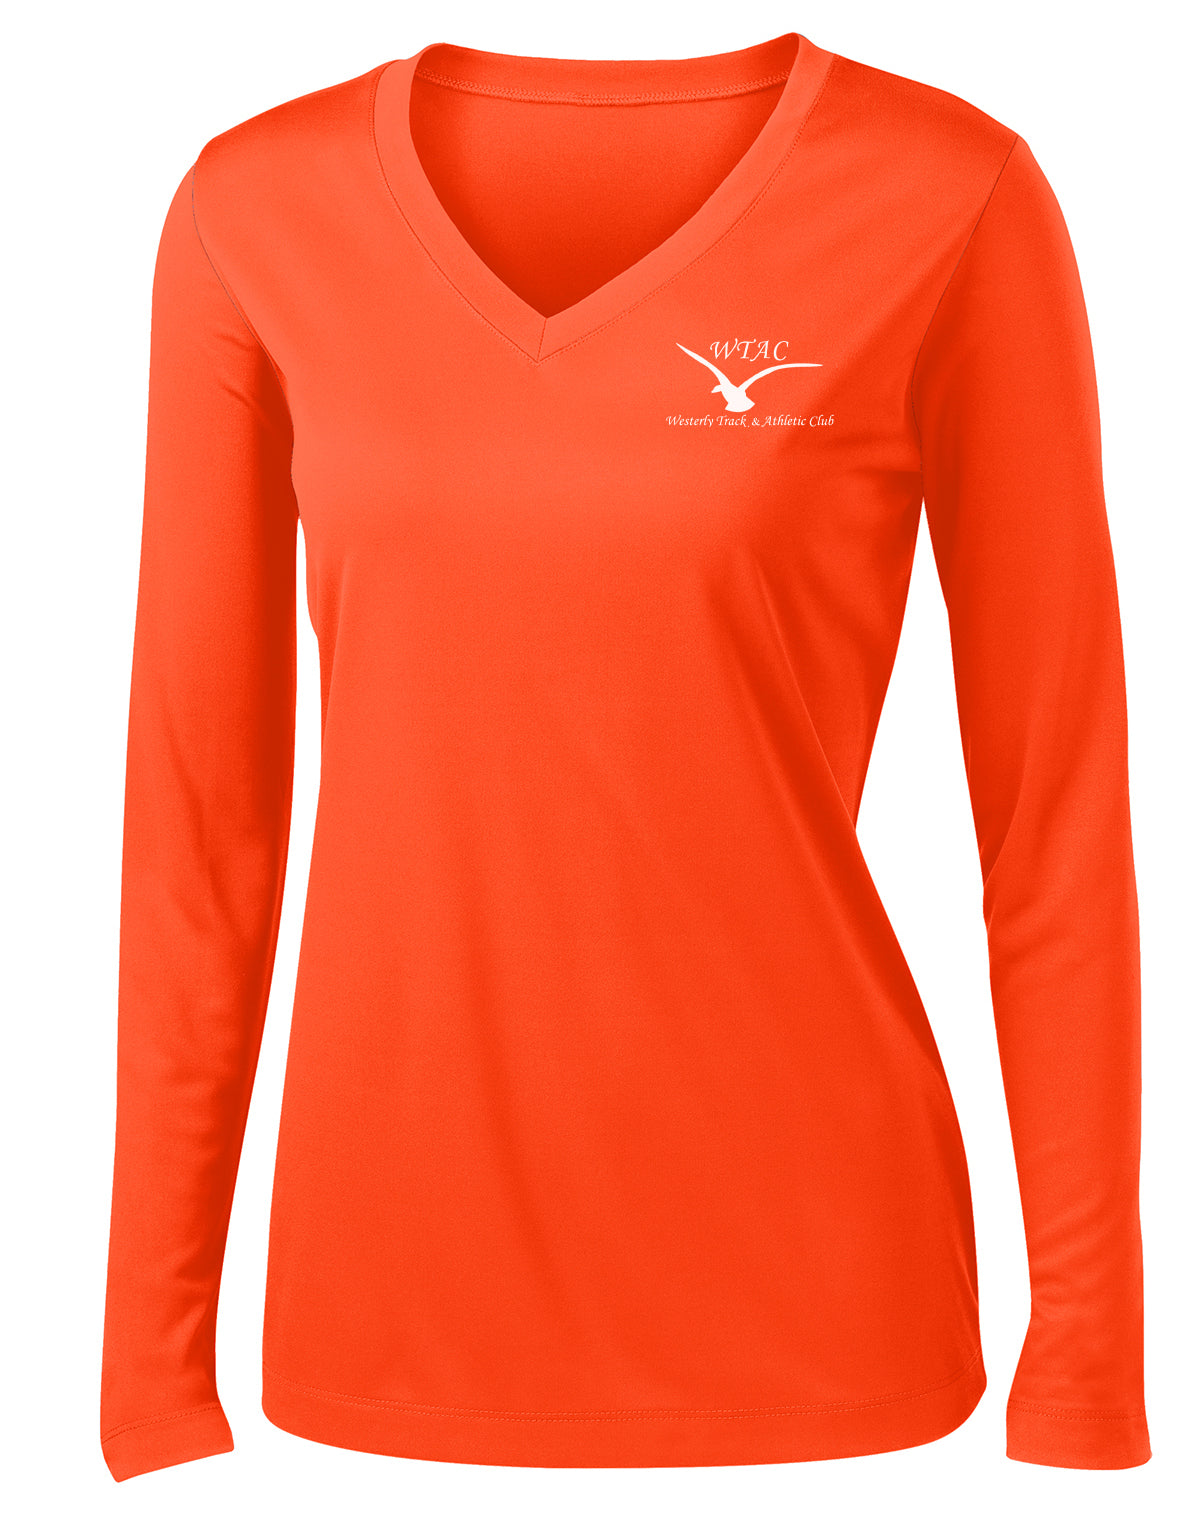 Westerly Track & Athletic Club Women's Long Sleeve Performance Shirt